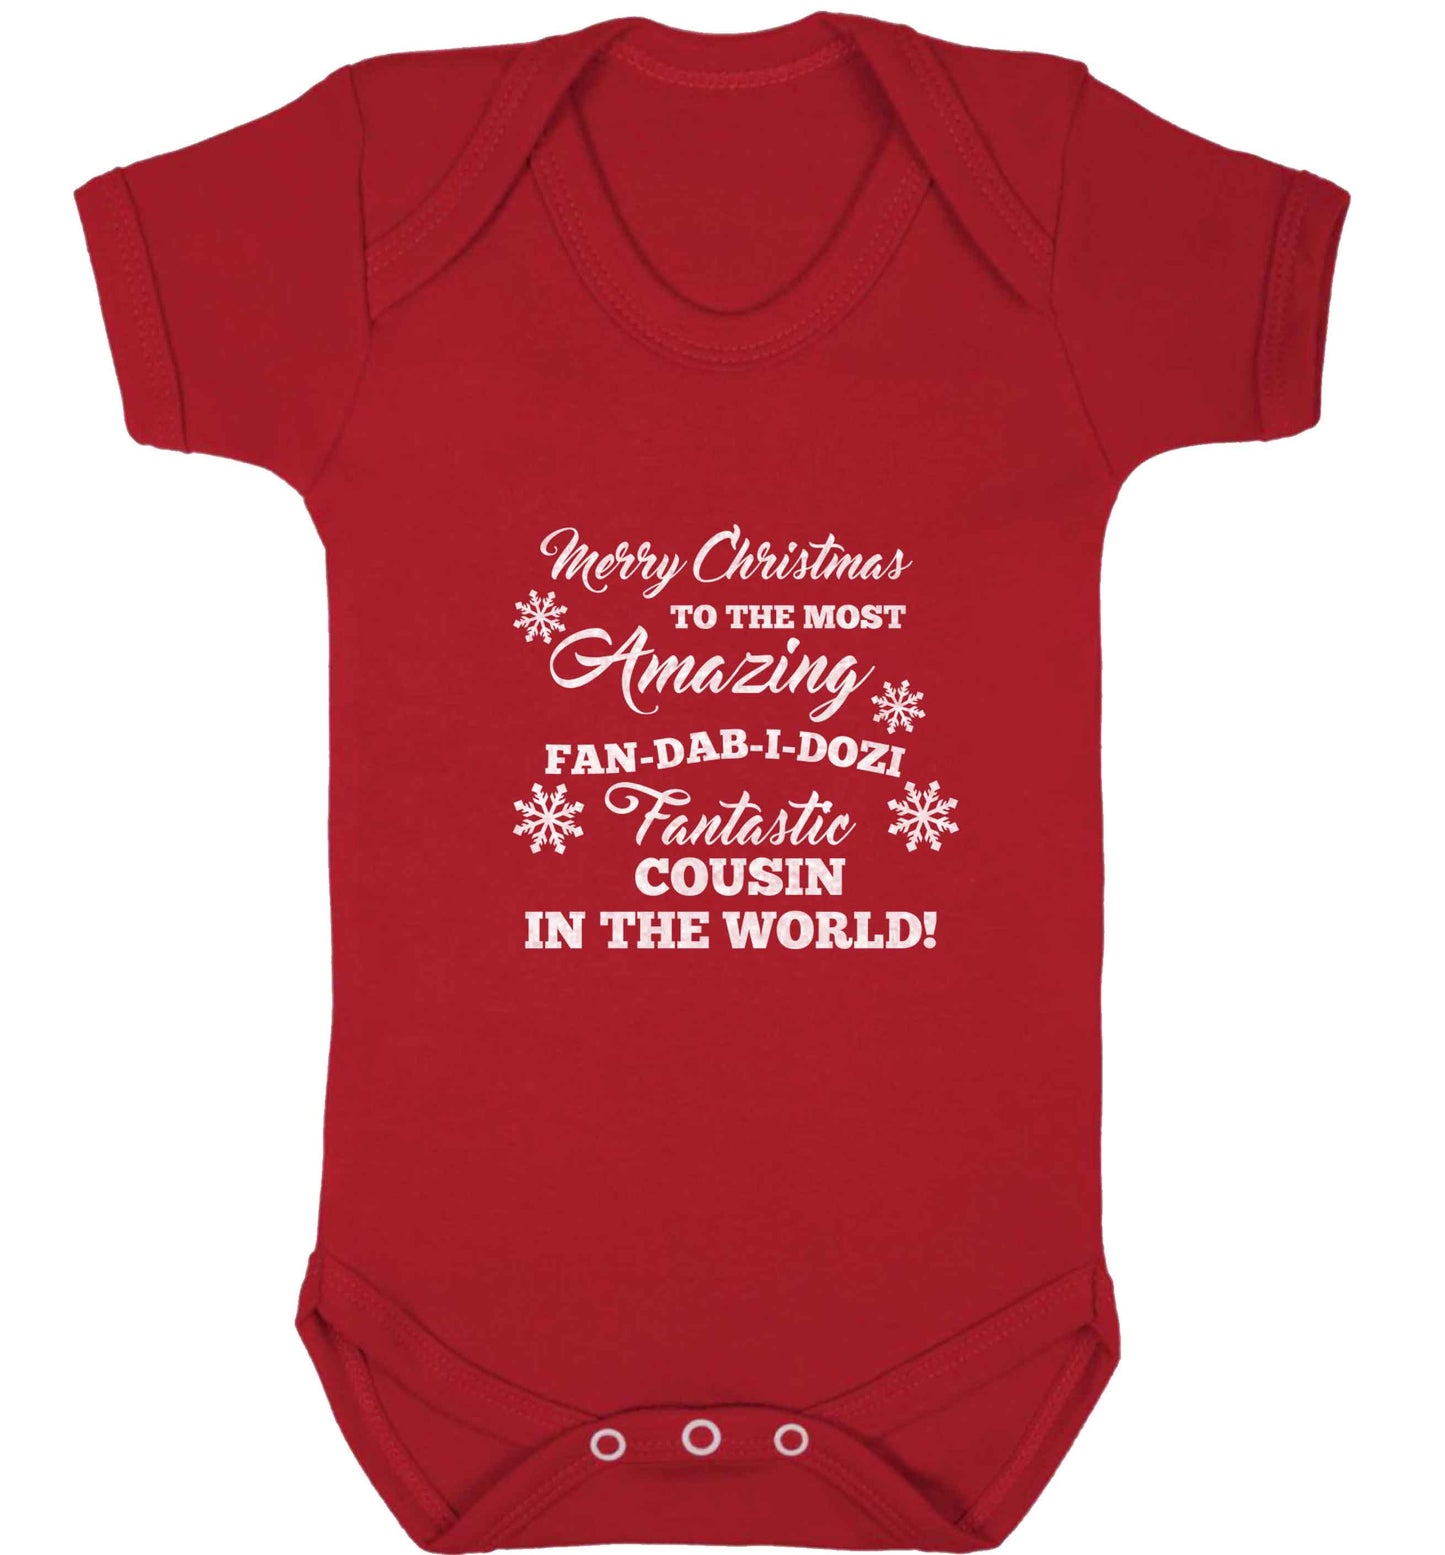 Merry Christmas to the most amazing fan-dab-i-dozi fantasic Cousin in the world baby vest red 18-24 months